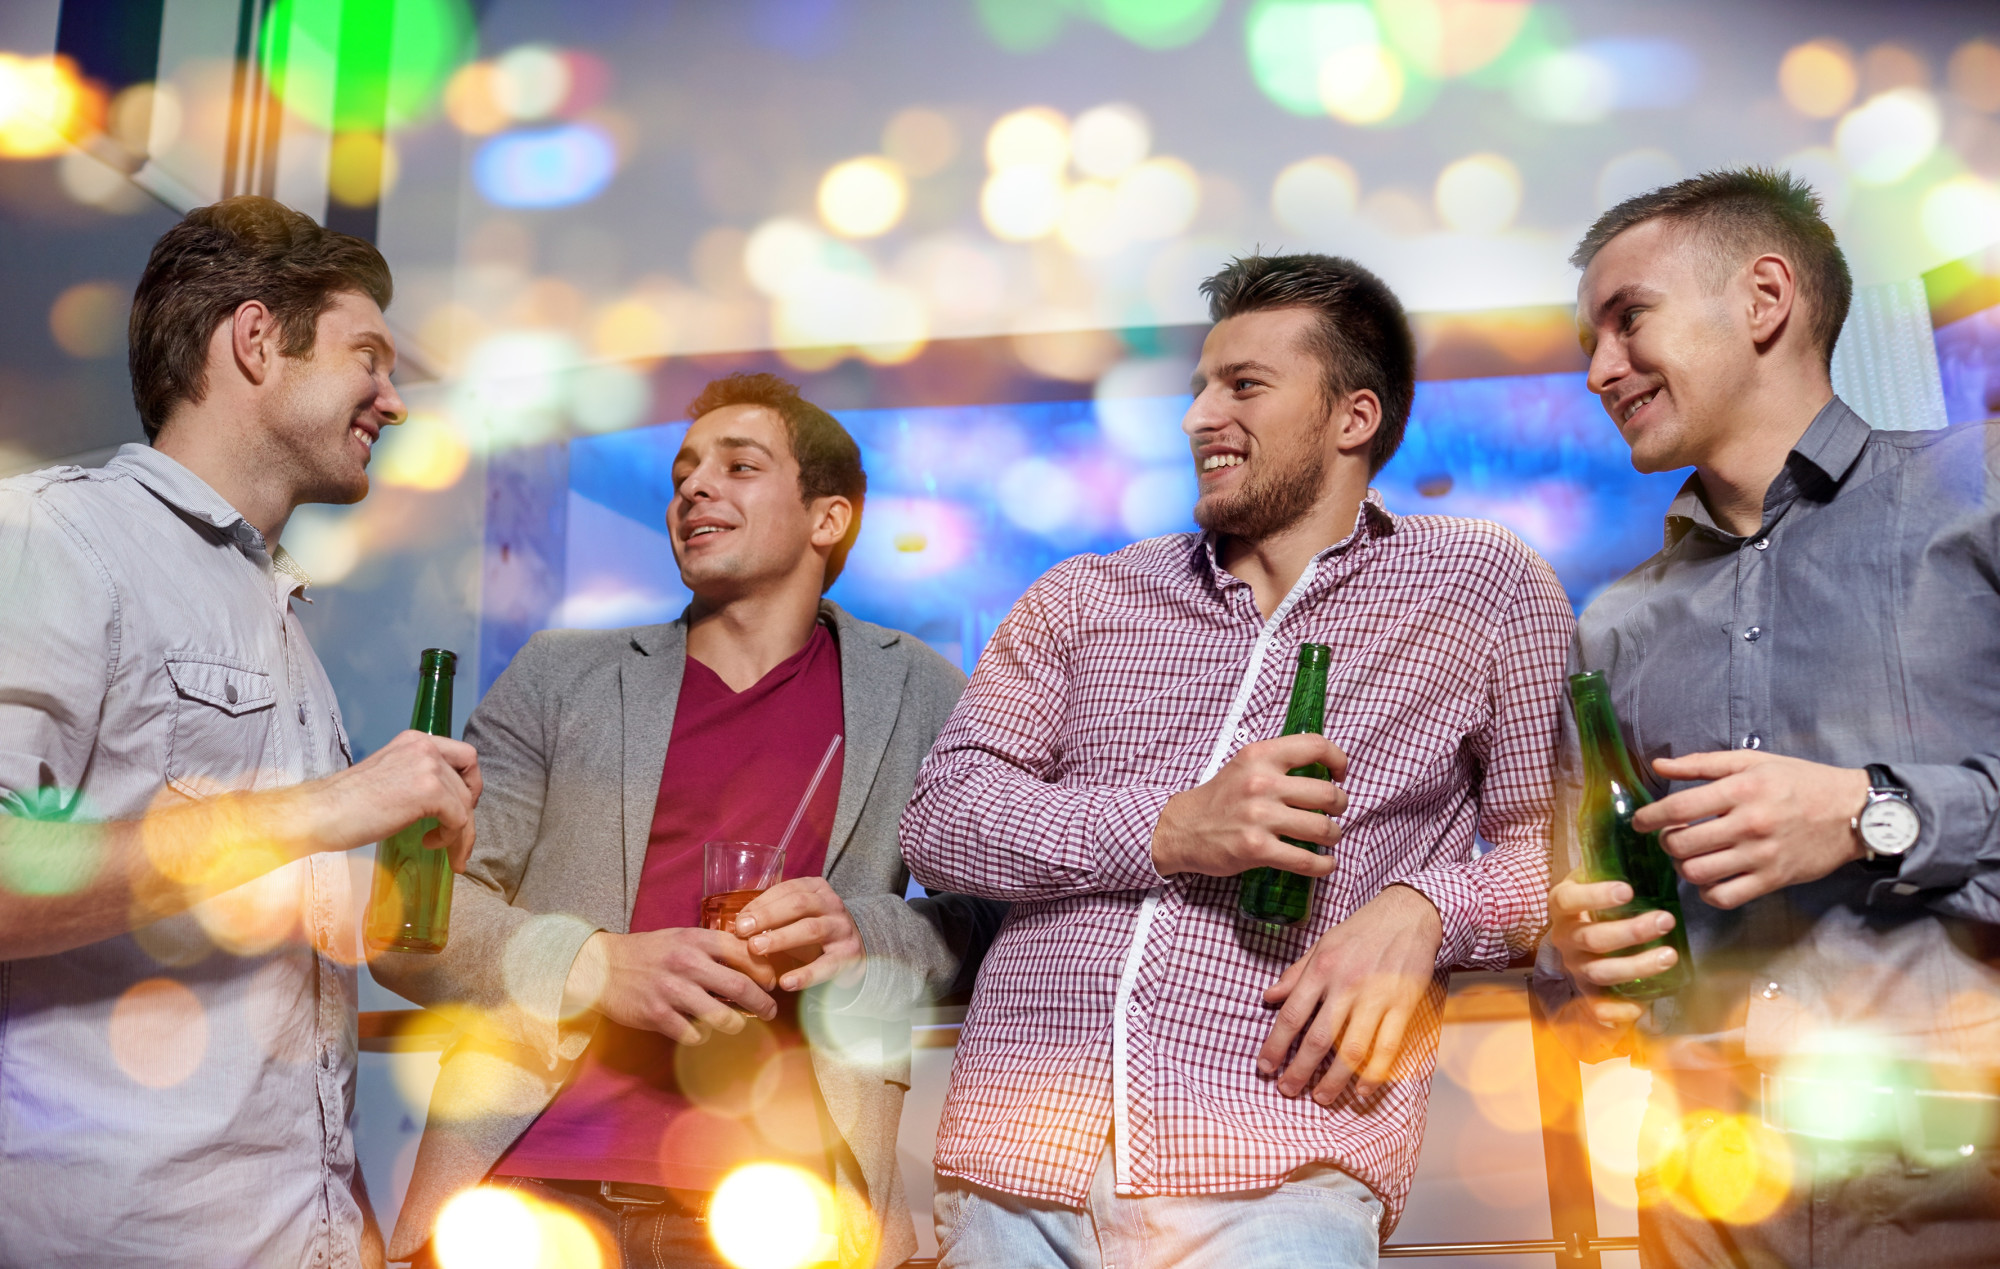 The Best Ideas for a Bachelor Party in Vegas 2021